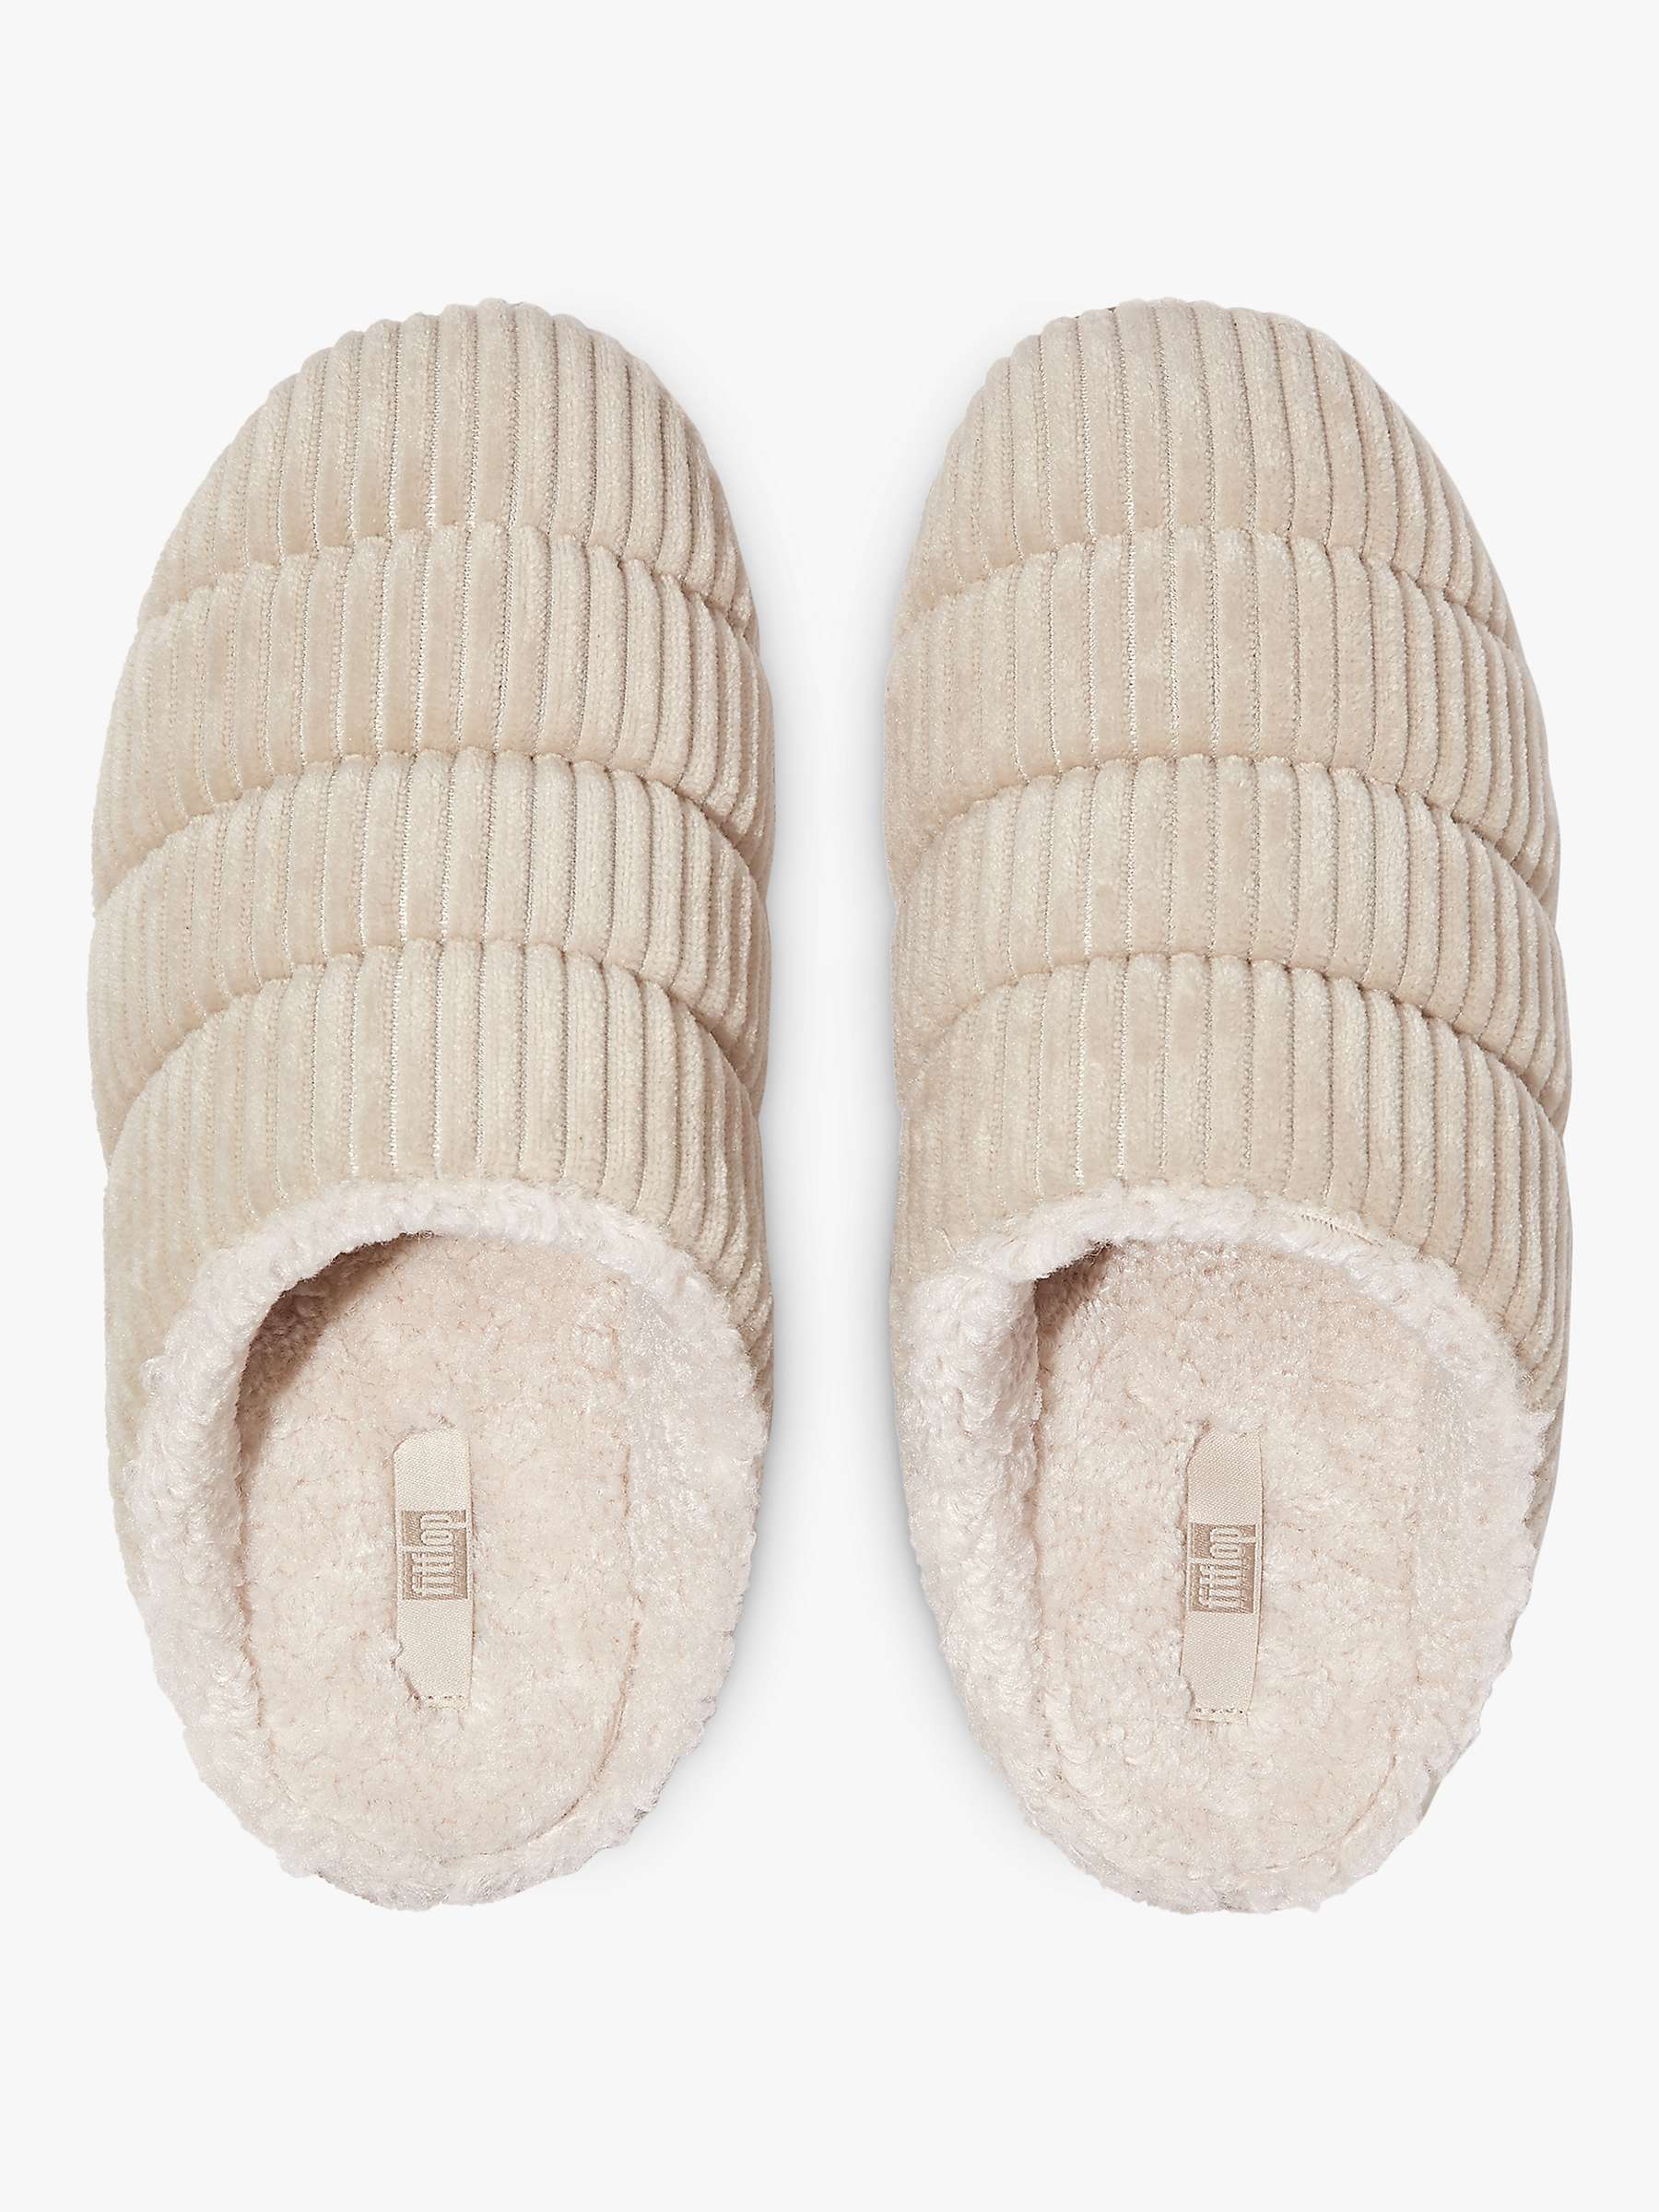 FitFlop Chrissie Fleece Cordurouy Slippers, Ivory at John Lewis & Partners